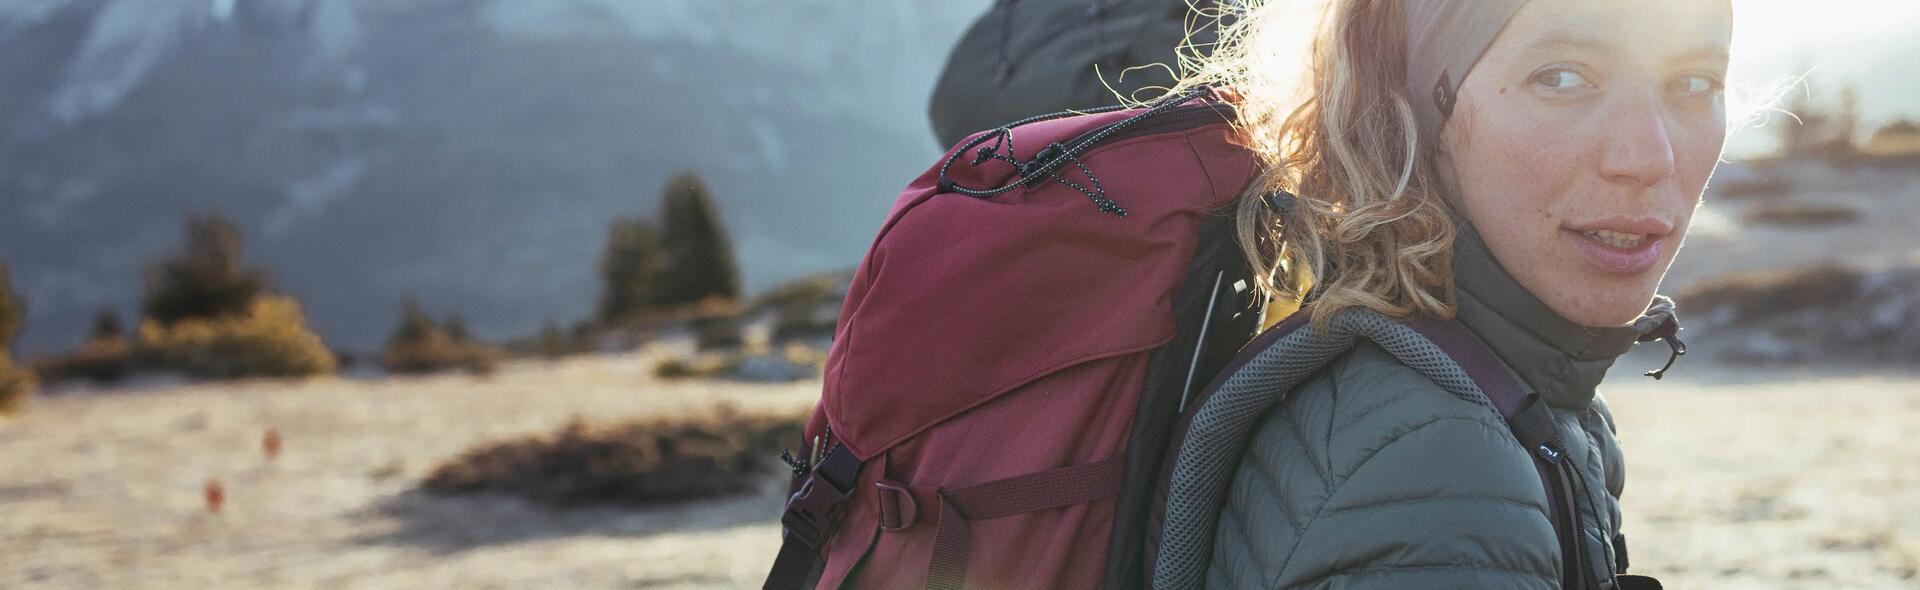 How to look after and repair a trekking backpack 